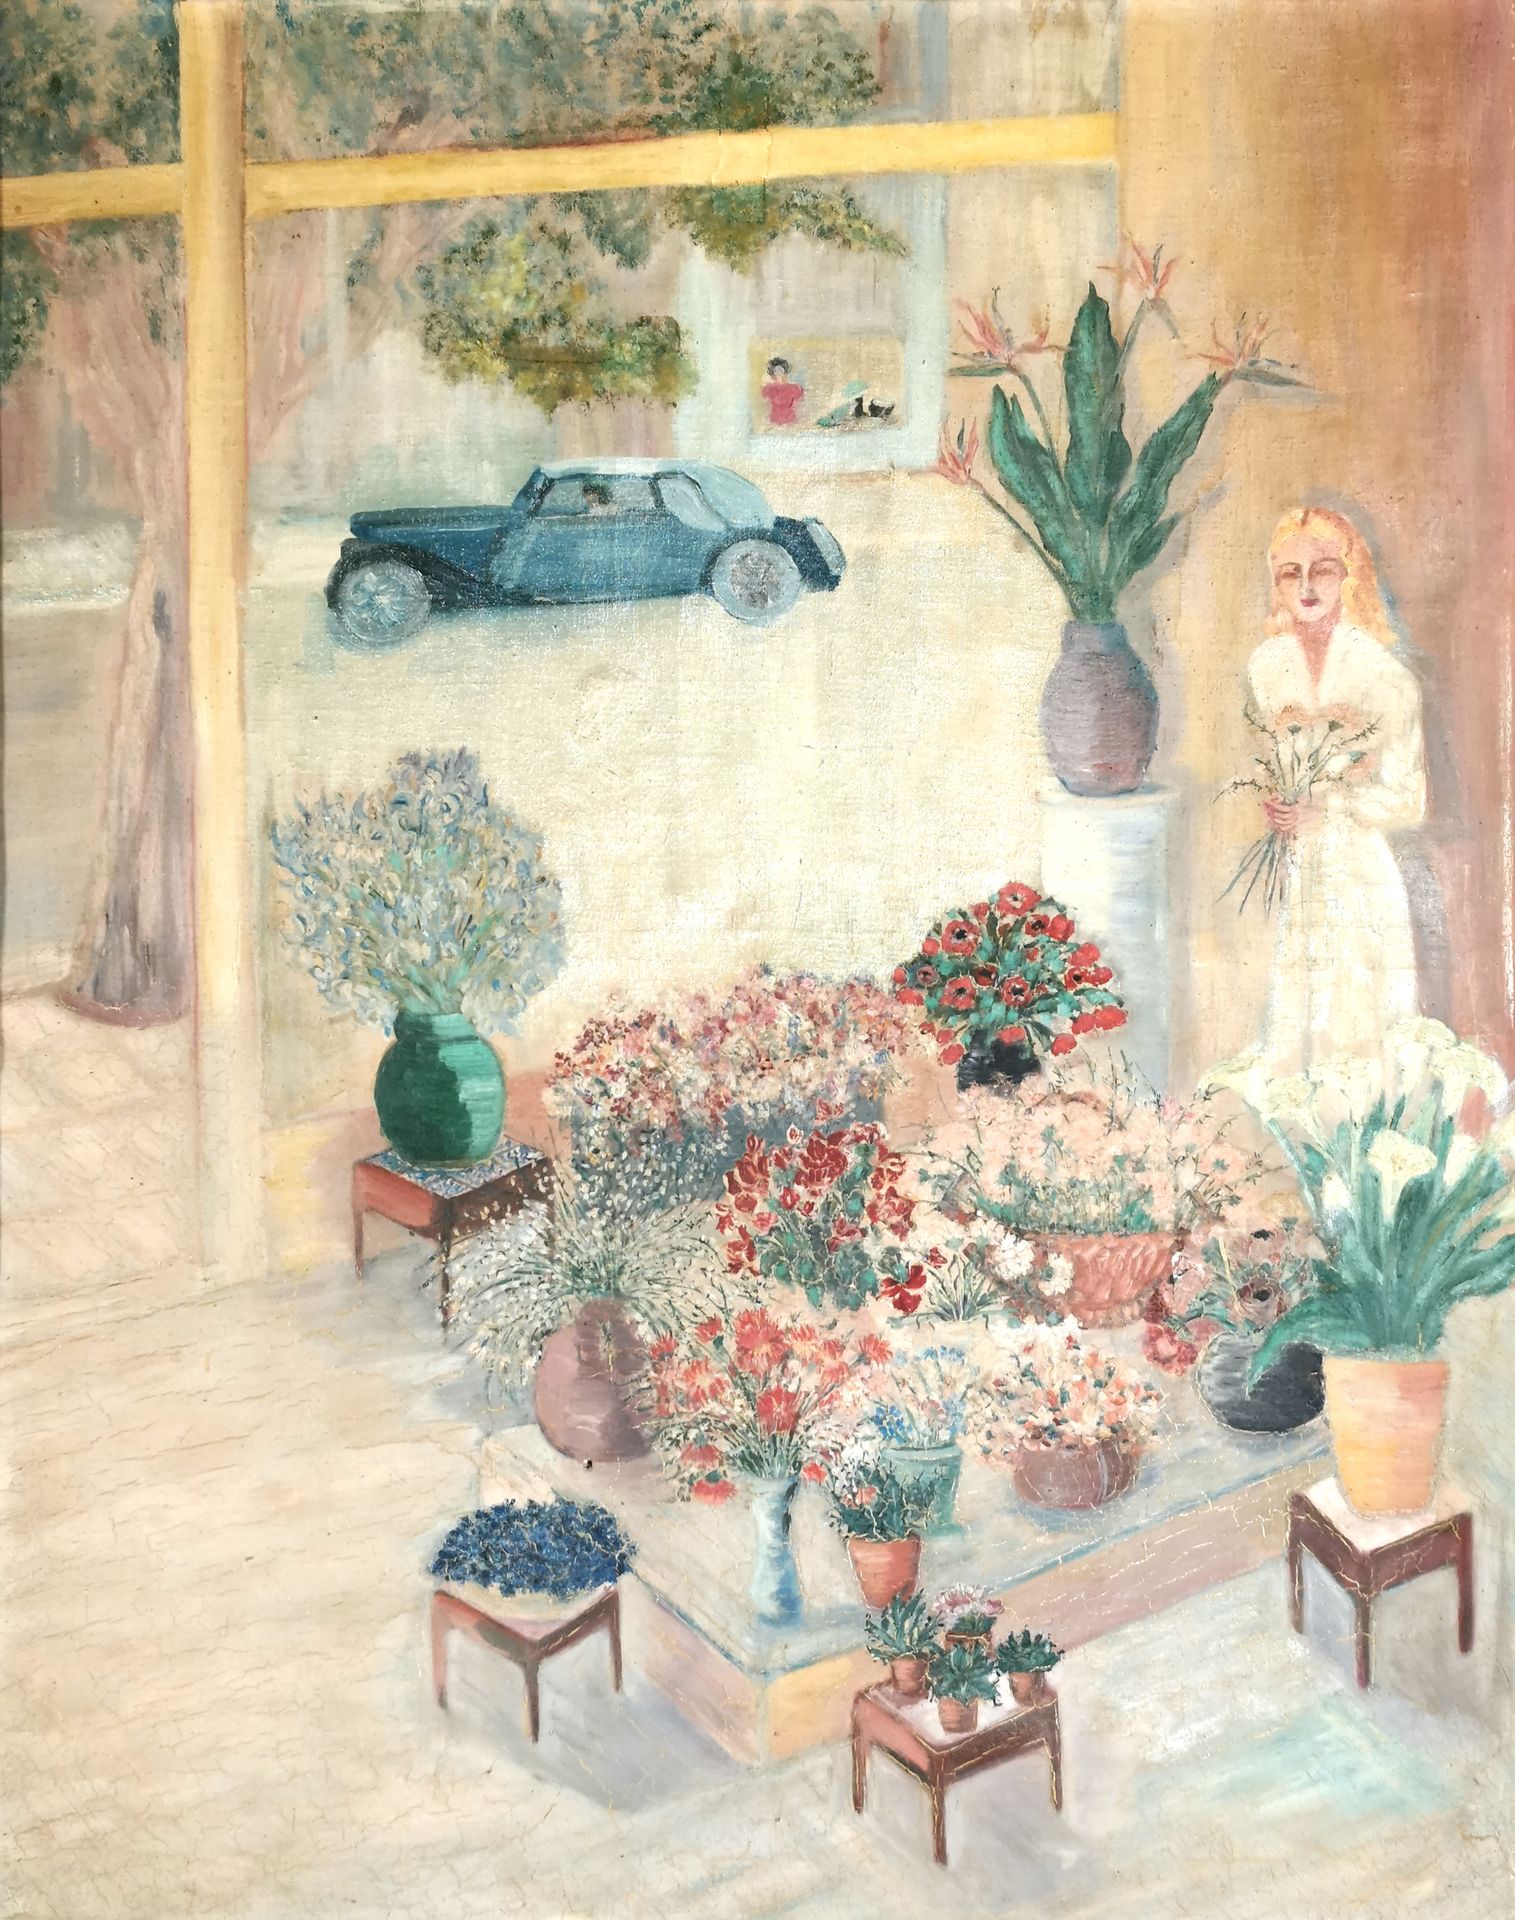 Null School of the 20th century

The Flower Merchant

Oil on canvas 

88 x 70 cm&hellip;